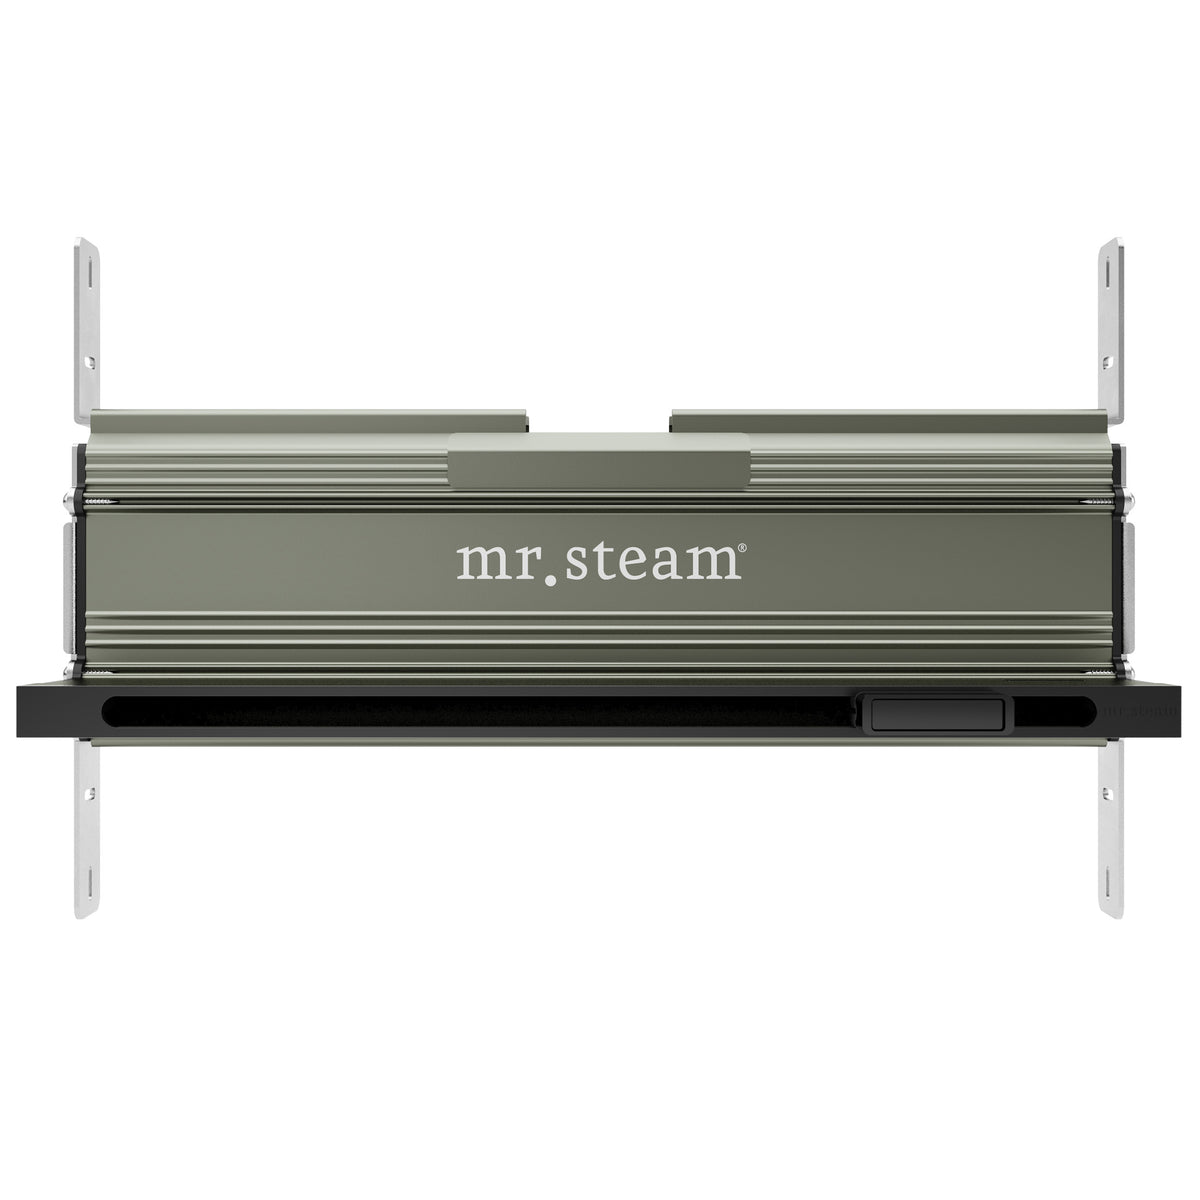 Mr. Steam XButler Max Linear Steam Shower Control Package with iSteamX Control and Linear SteamHead